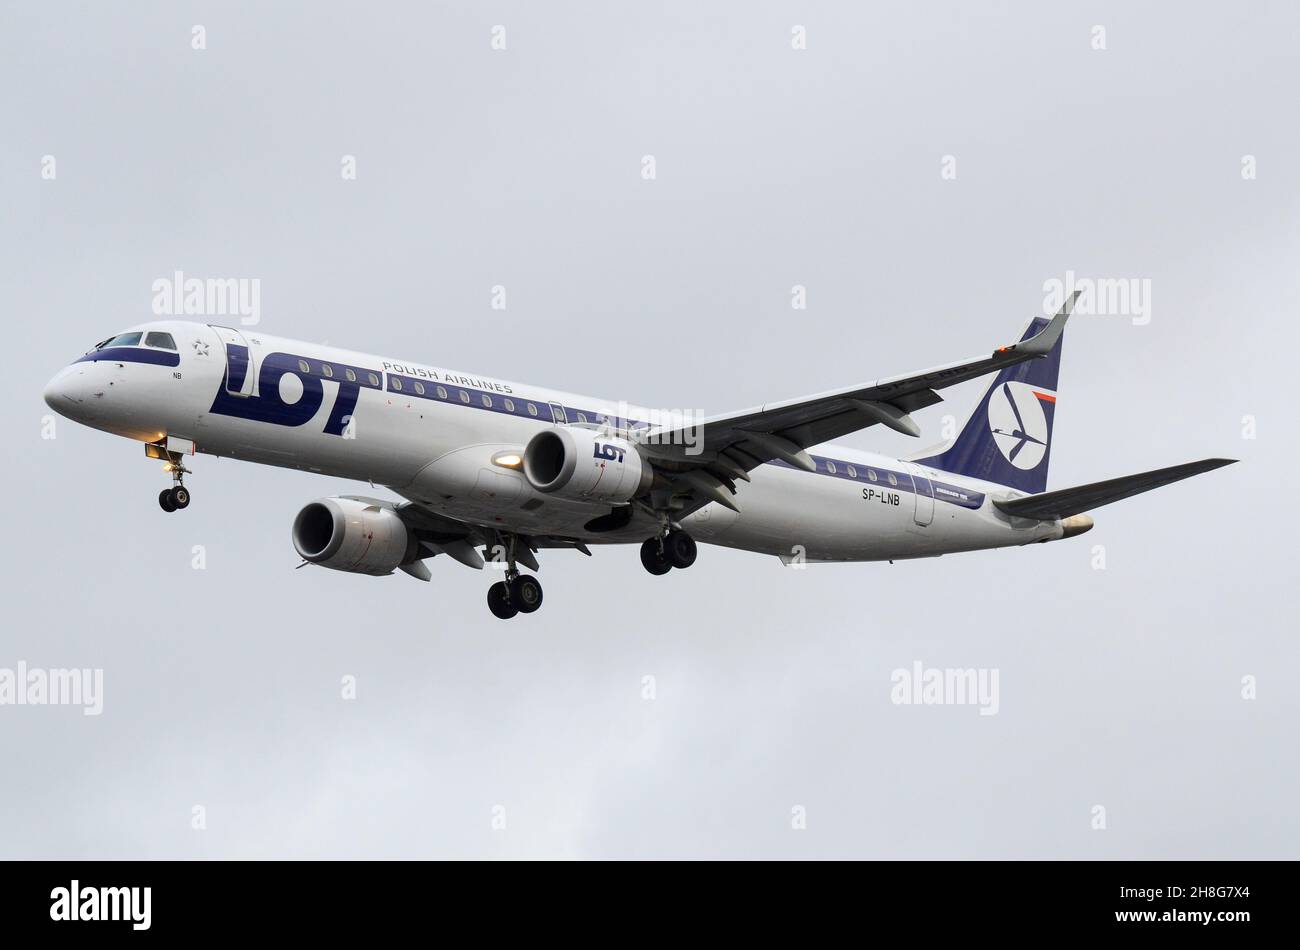 LOT Polish Airlines Embraer ERJ-195LR (ERJ-190-200 LR) airliner jet plane SP-LNB on finals approach to land at London Heathrow Airport, UK. Old livery Stock Photo